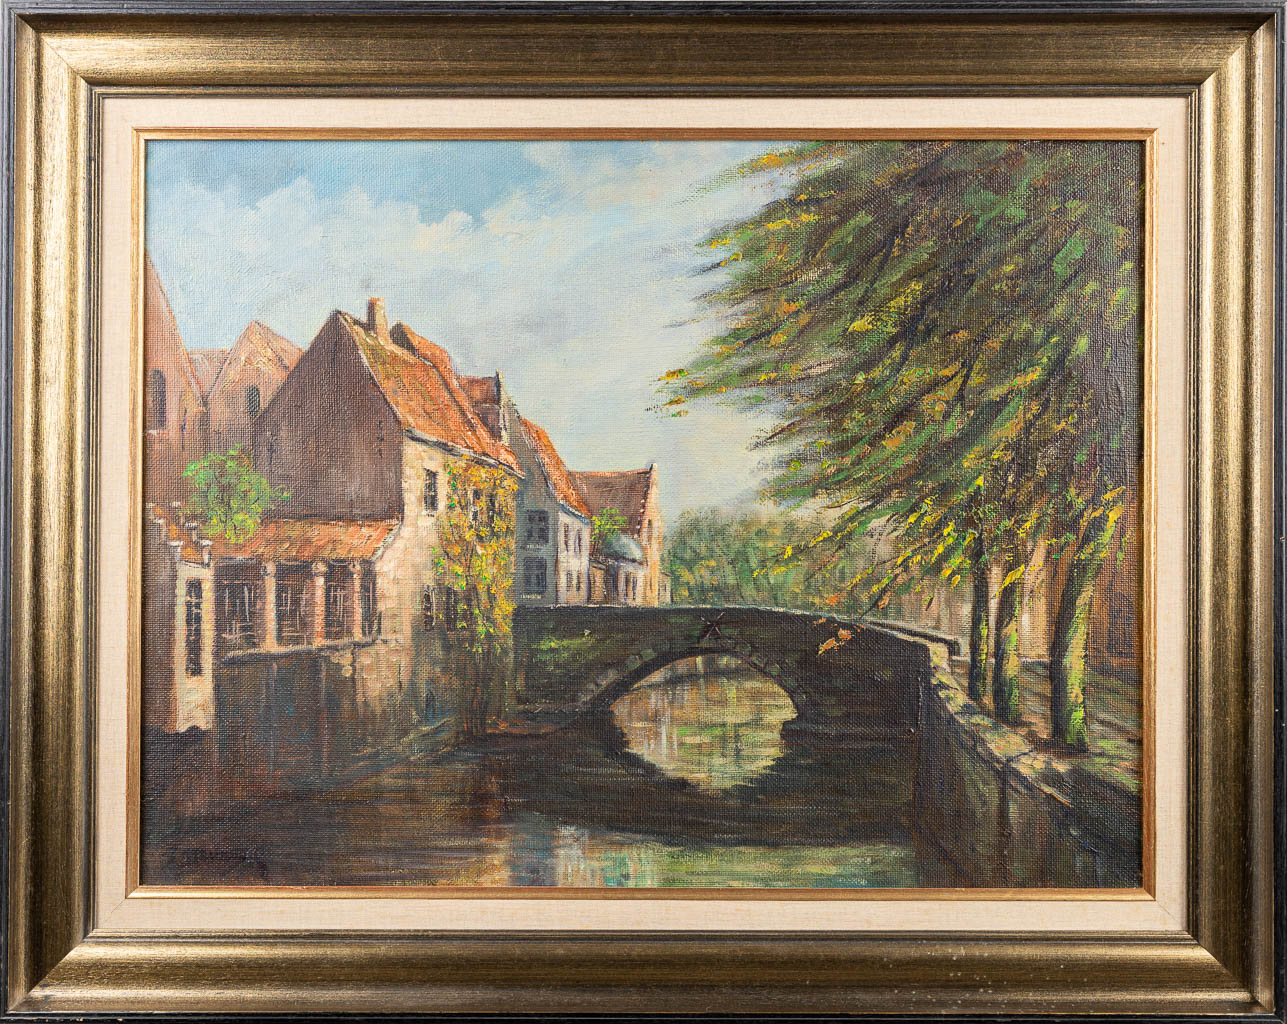 J. DEVULDER (XX) 'Bruges' a collection of 3 paintings. (80 x 60 cm)